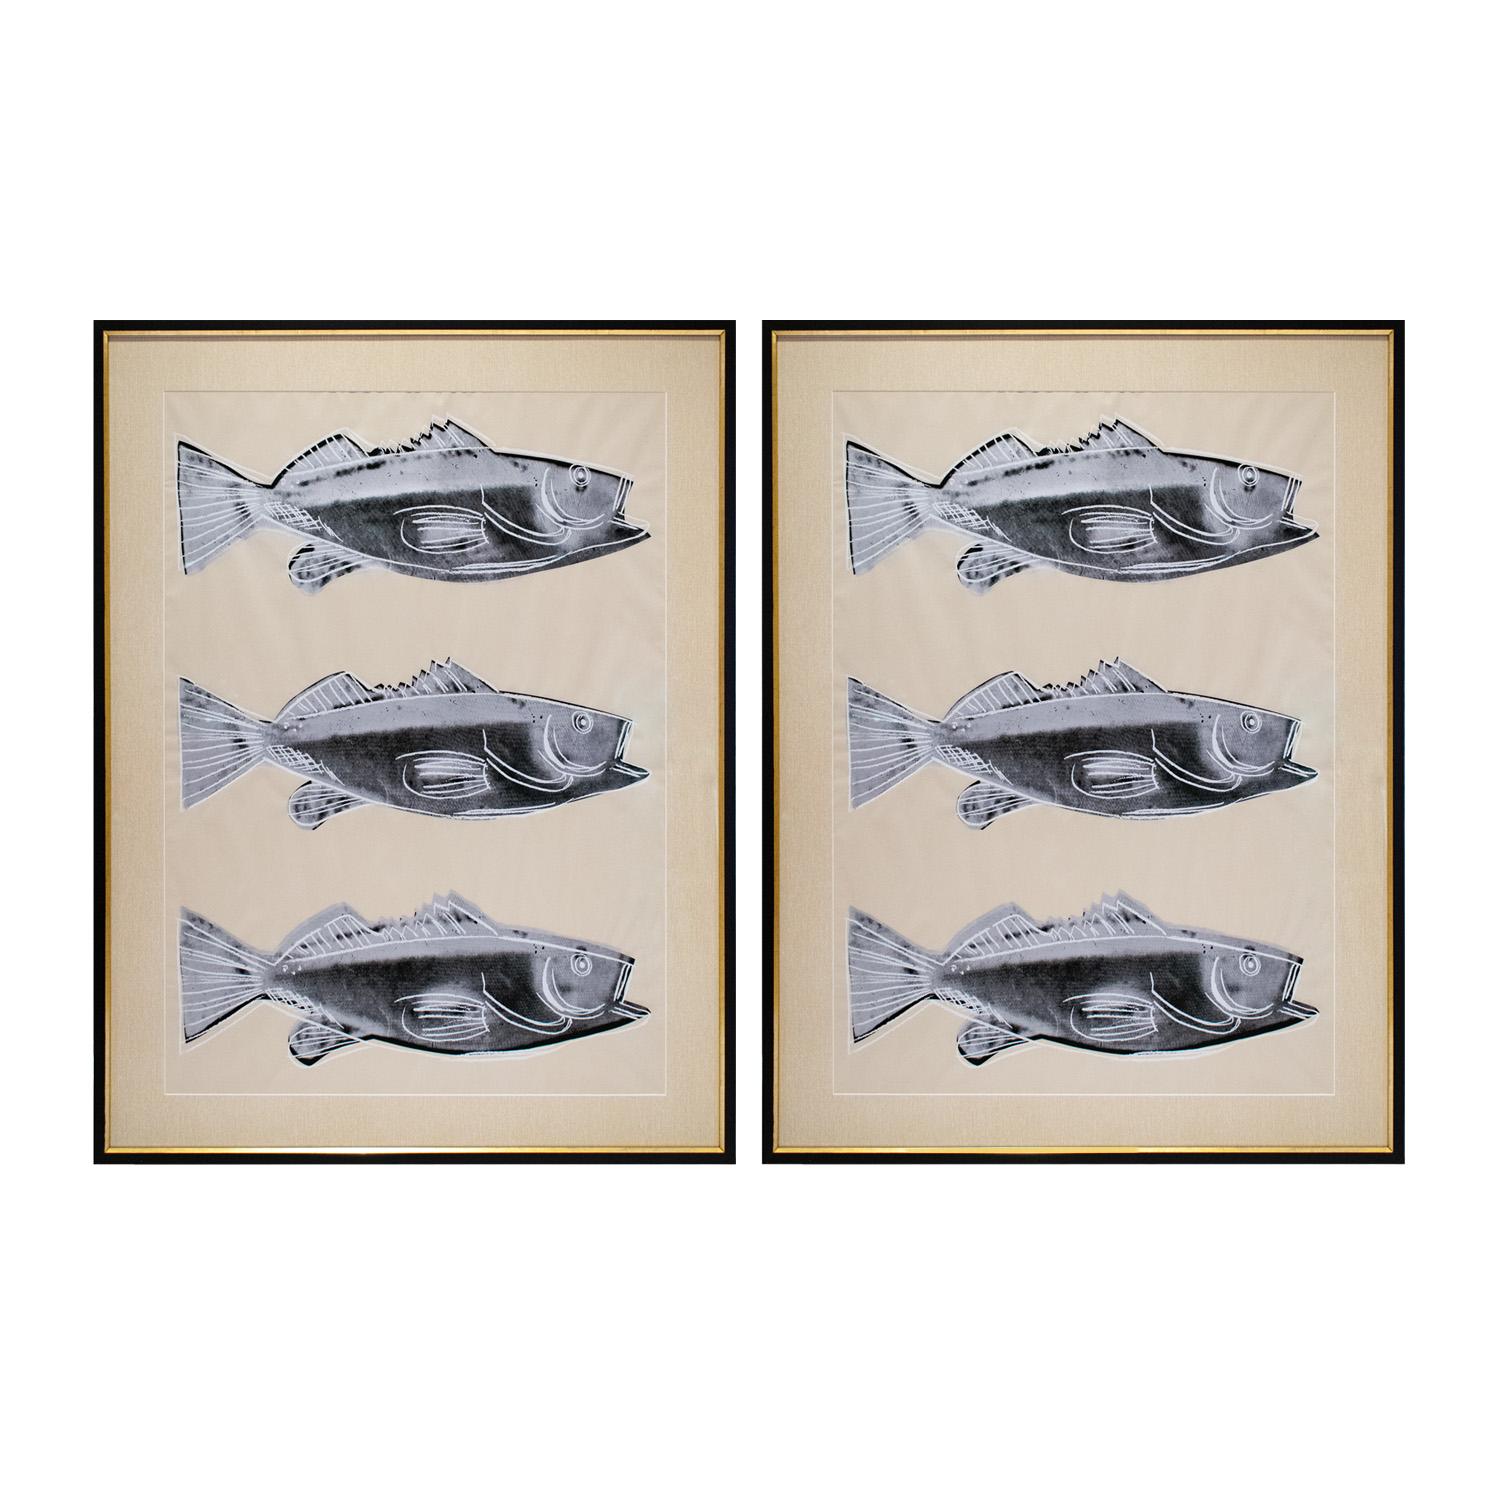 Pair of framed Fish (F. & S. IIIA.39) screen prints in color, on wallpaper, with full margins by Andy Warhol, American 1983.  These have been custom framed by Lobel Modern as a matched pair.  There is a window on the back which shows all stamps and